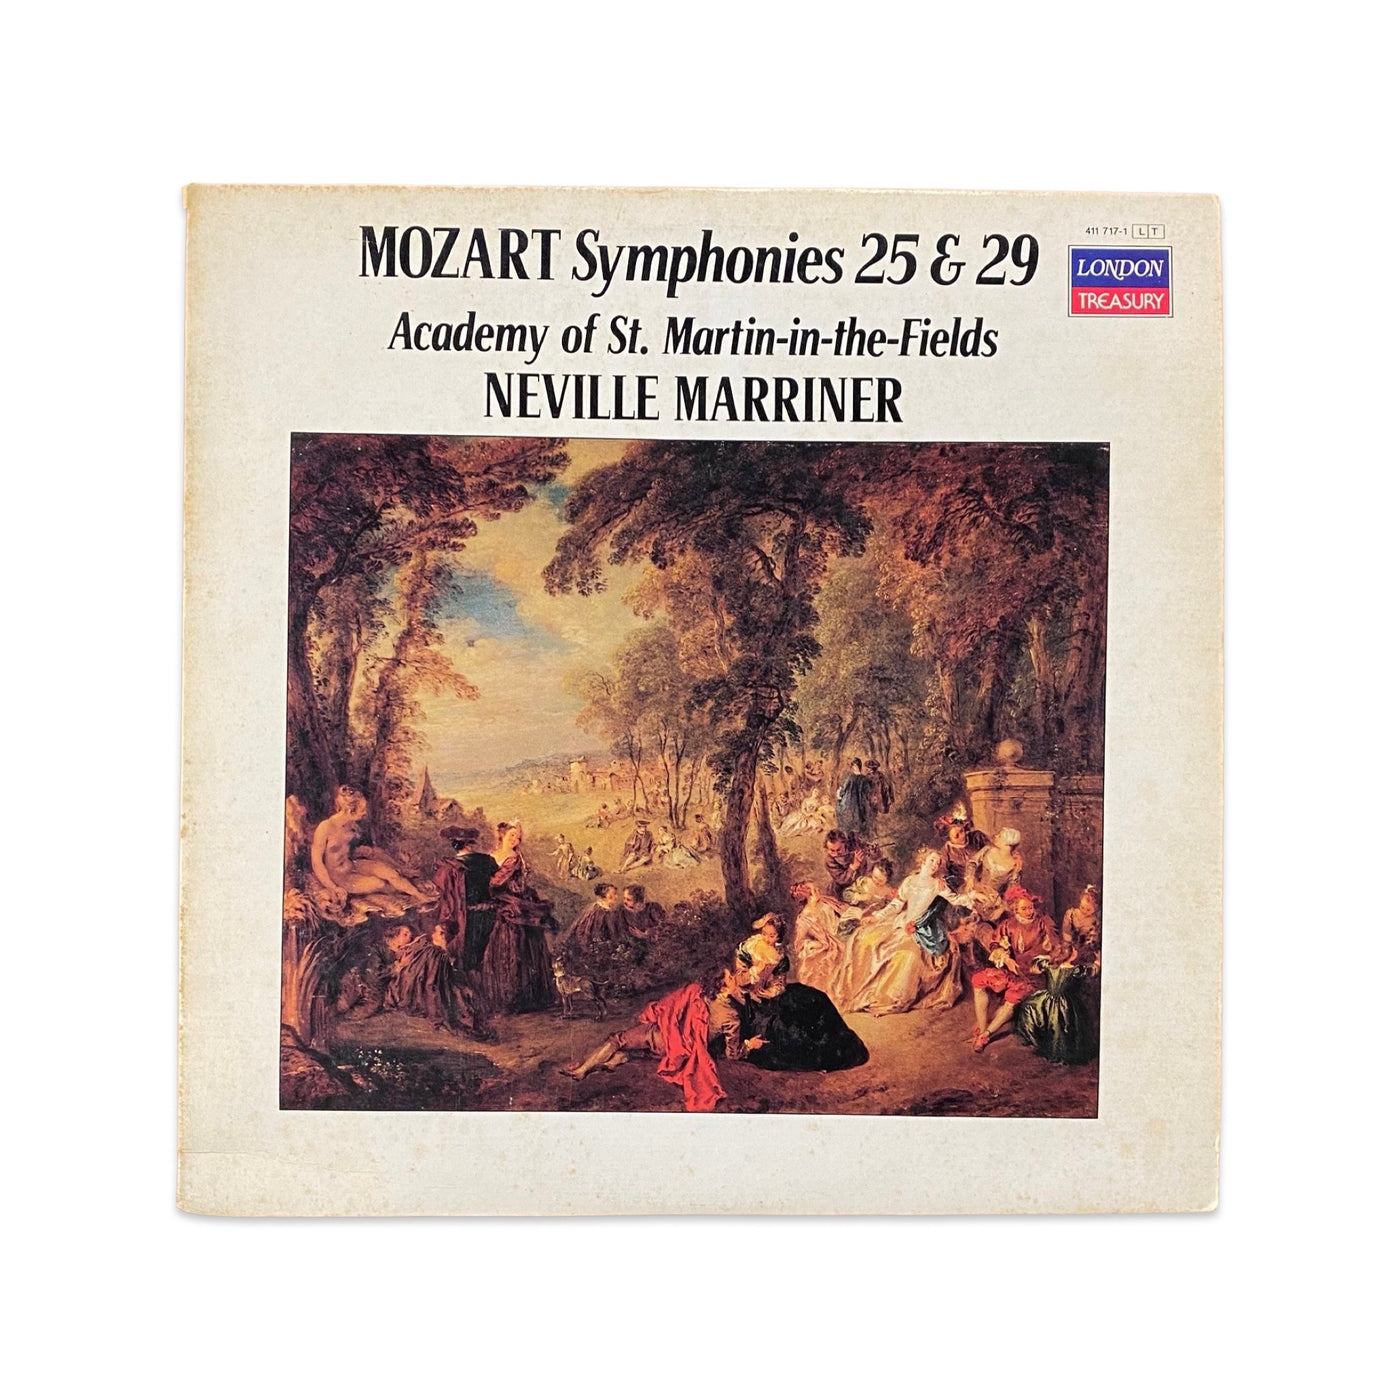 Sir Neville Marriner And The Academy Of St. Martin-in-the-Fields - Mozart Symphonies 25 & 29